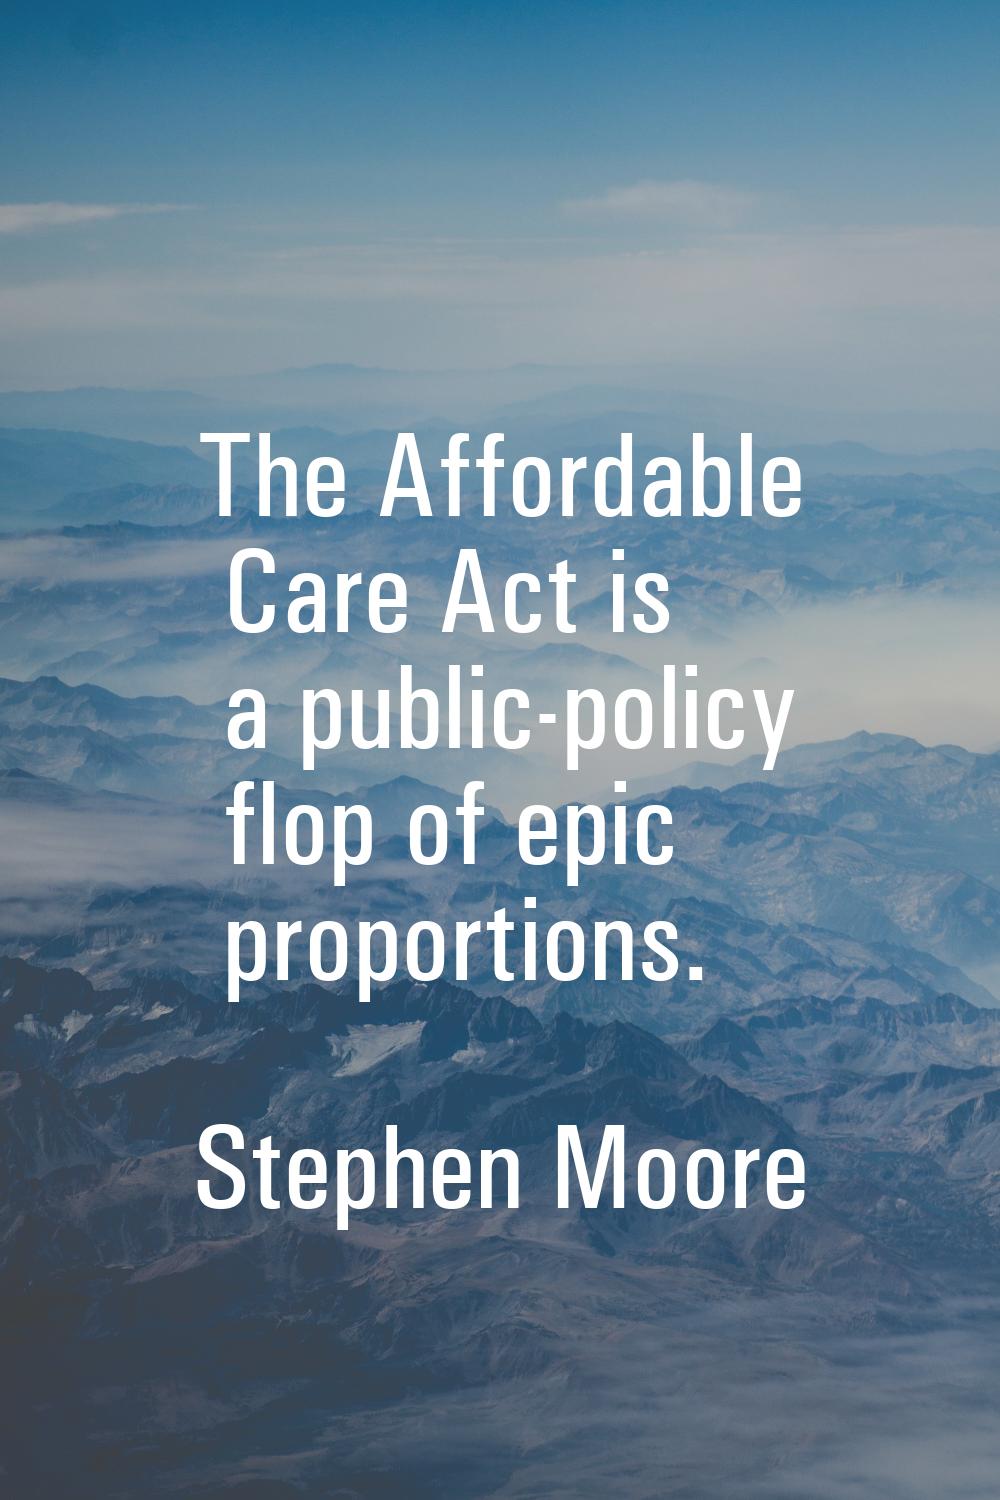 The Affordable Care Act is a public-policy flop of epic proportions.